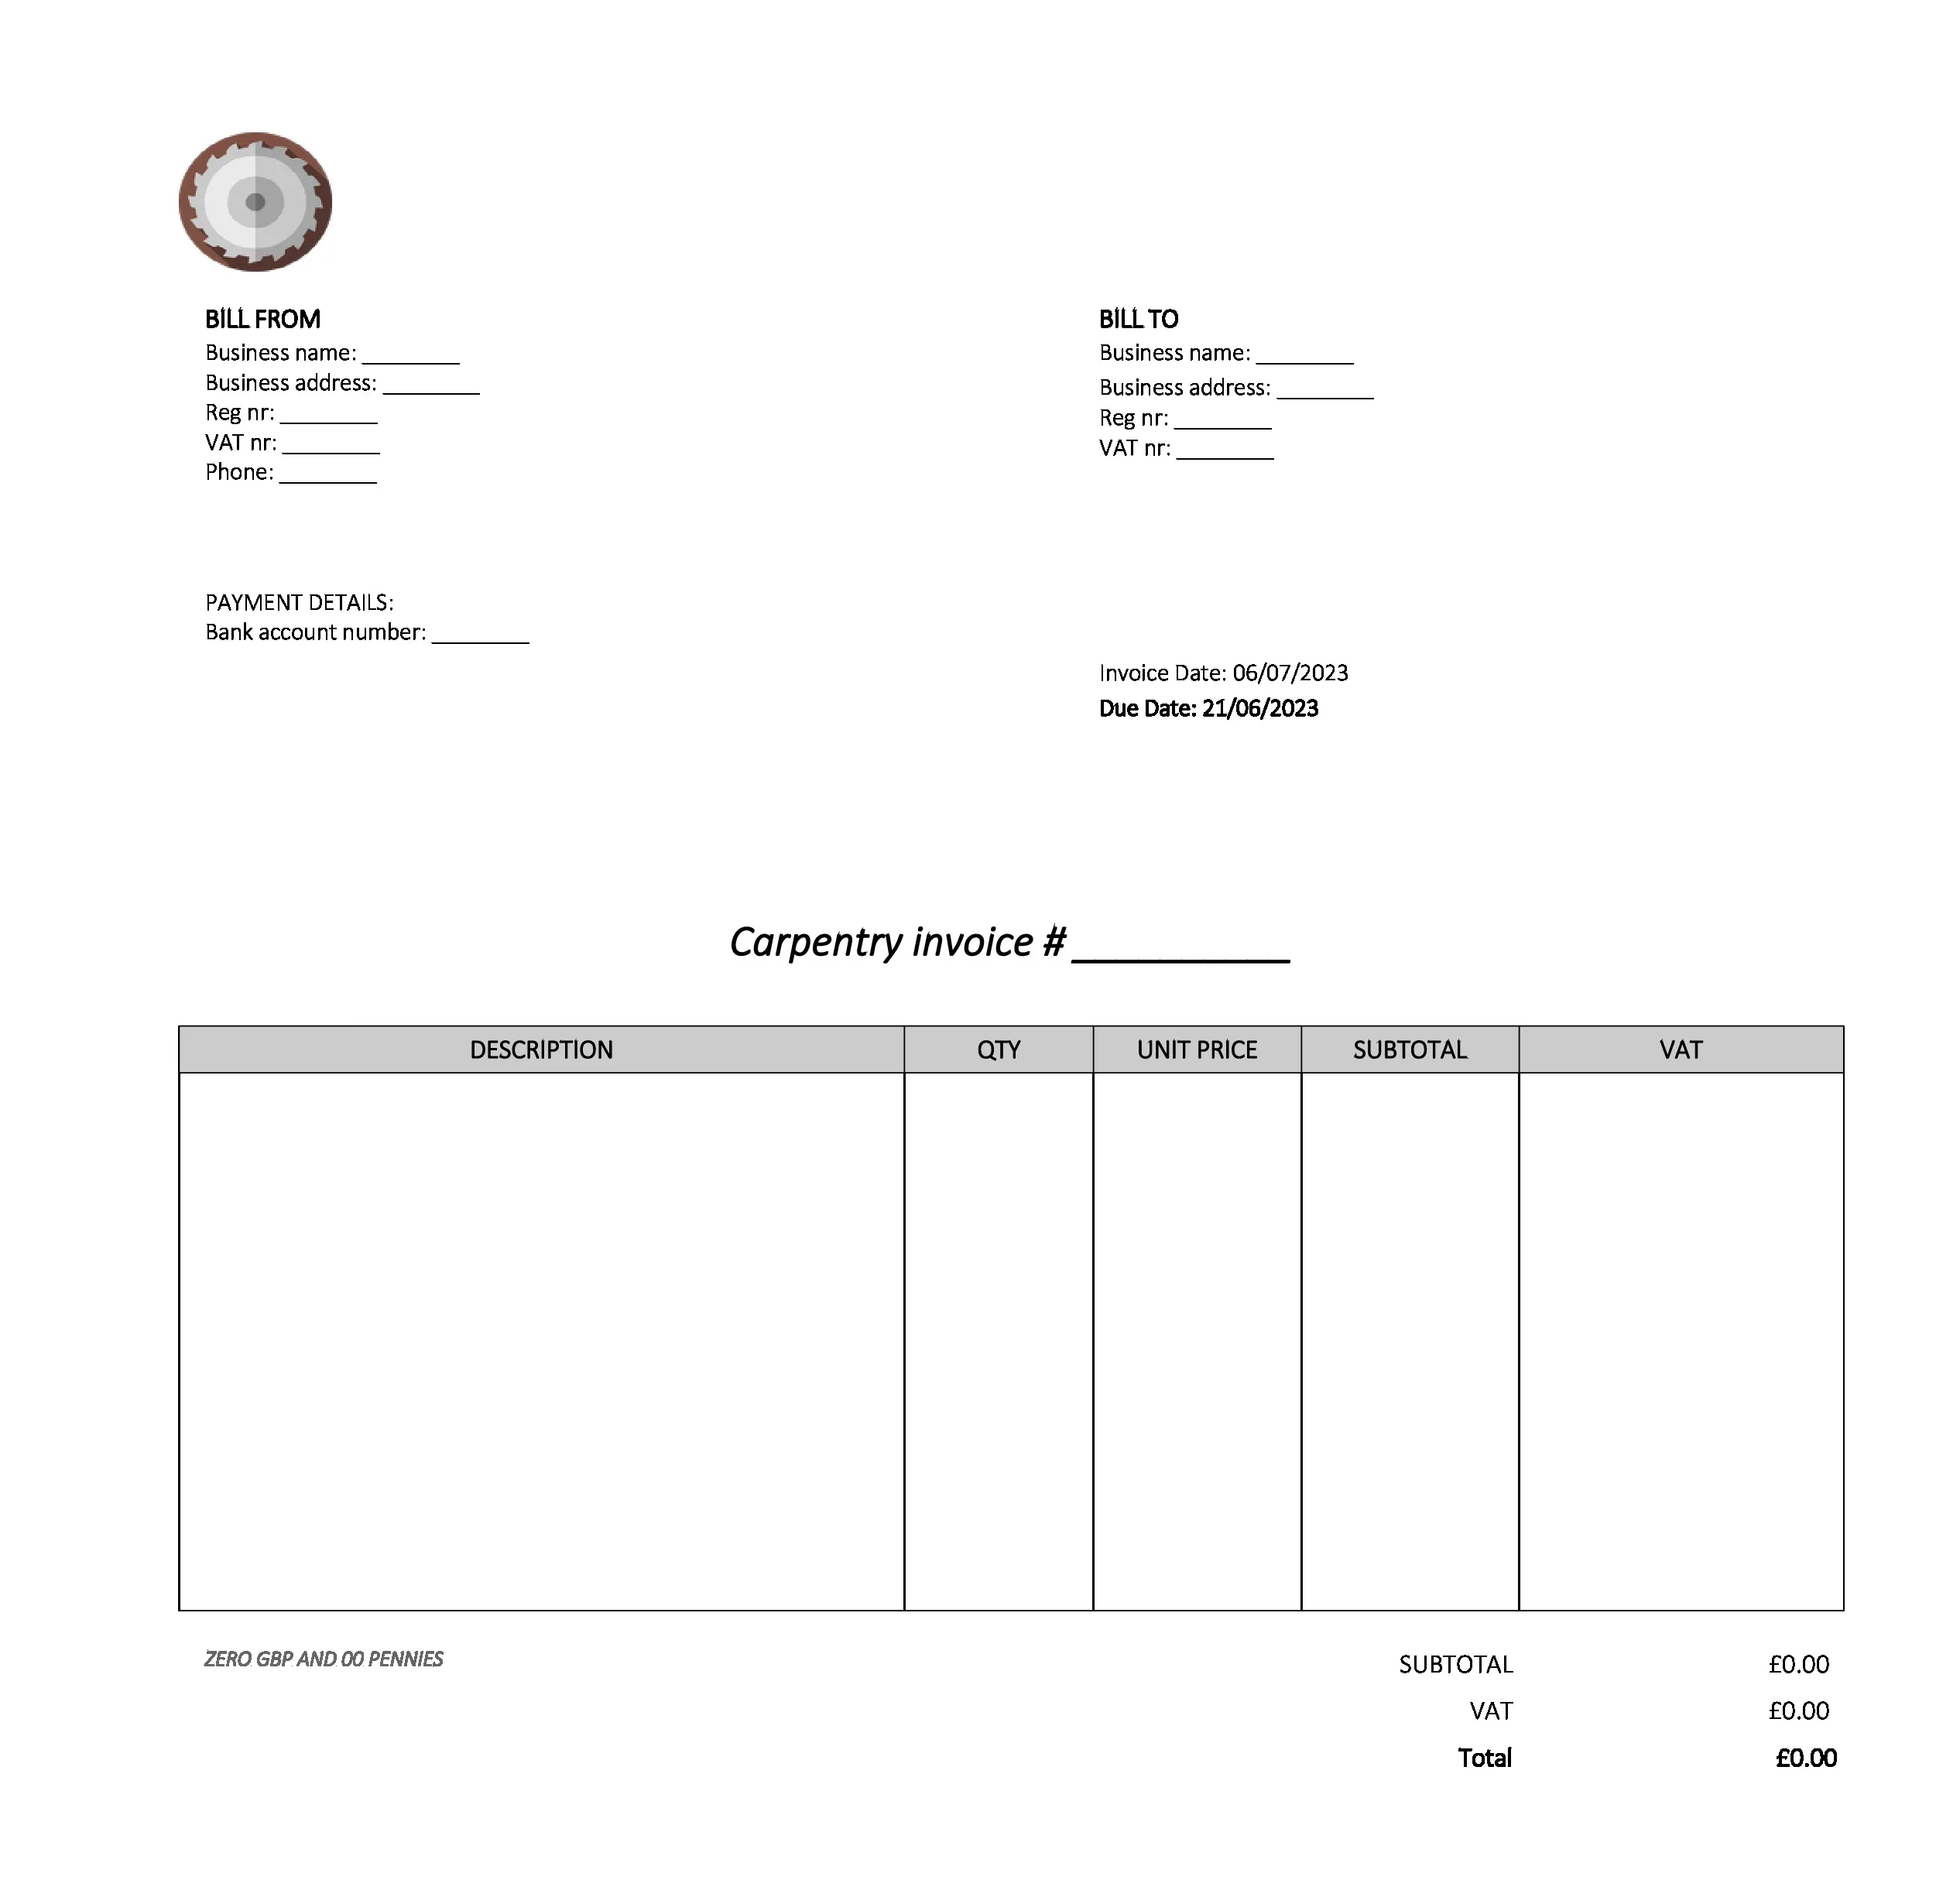 empty carpentry invoice template UK Excel / Google sheets